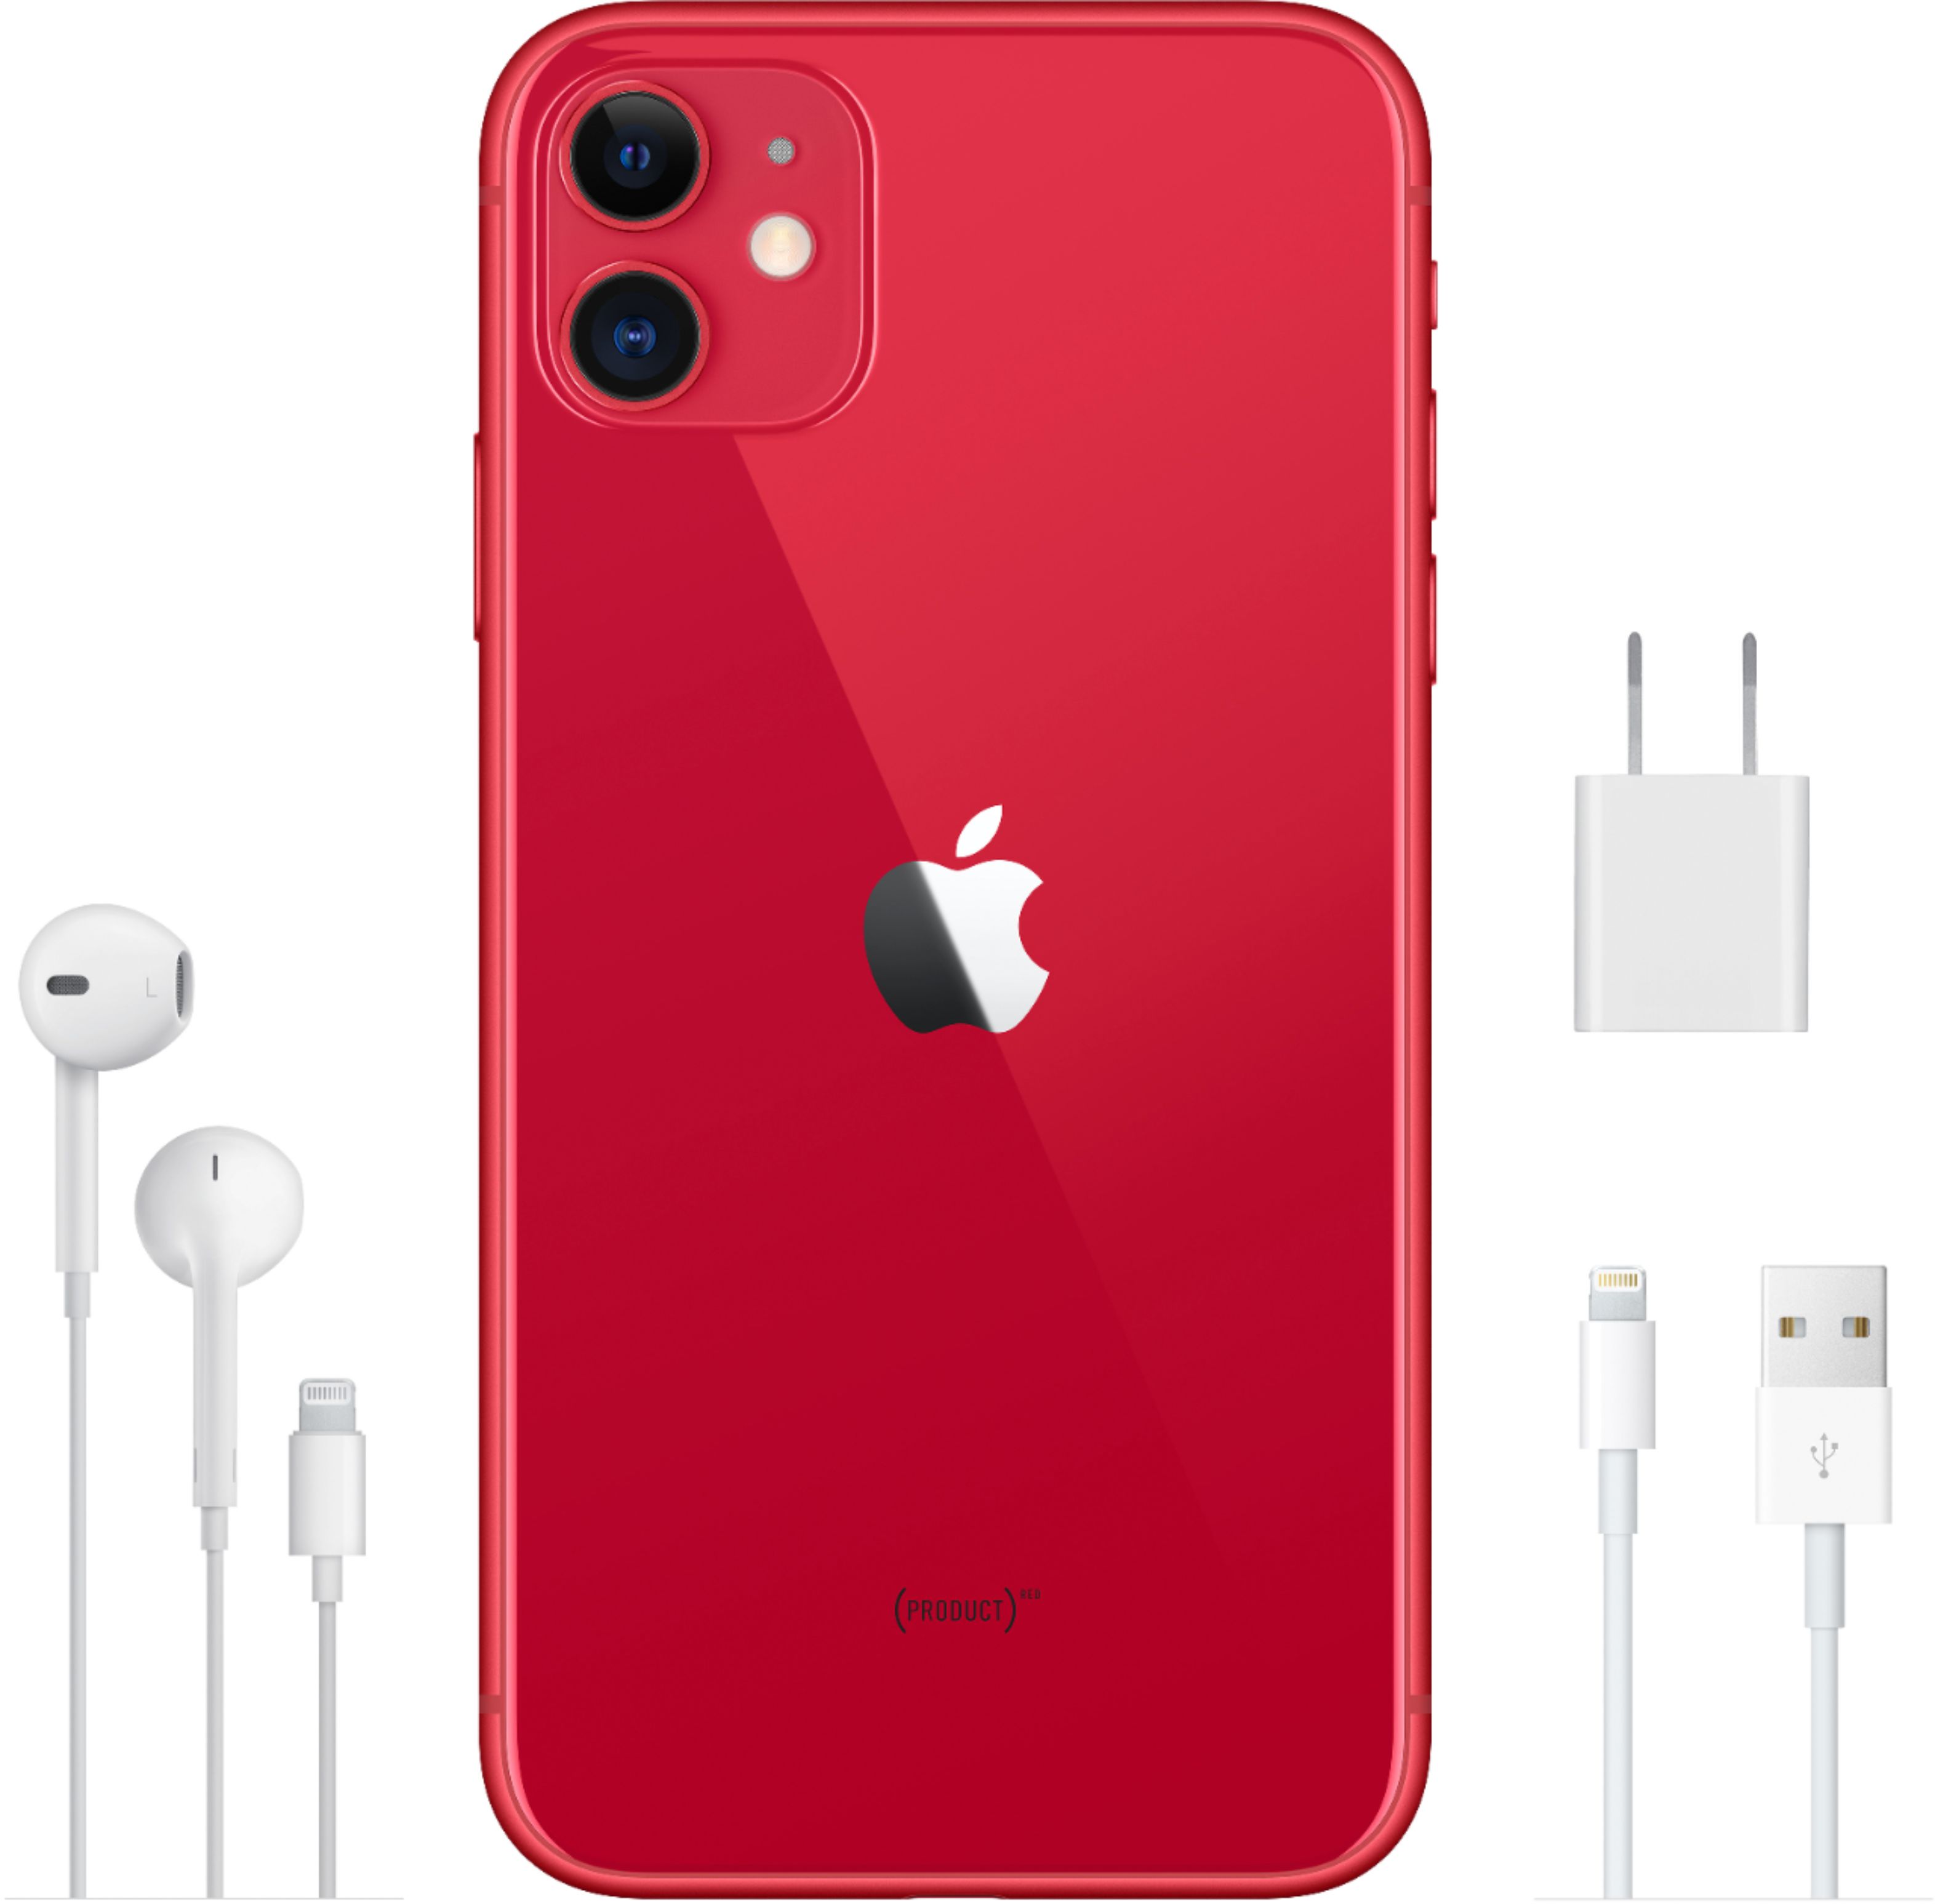 iPhone 11 (PRODUCT)RED 256 GB Softbank-